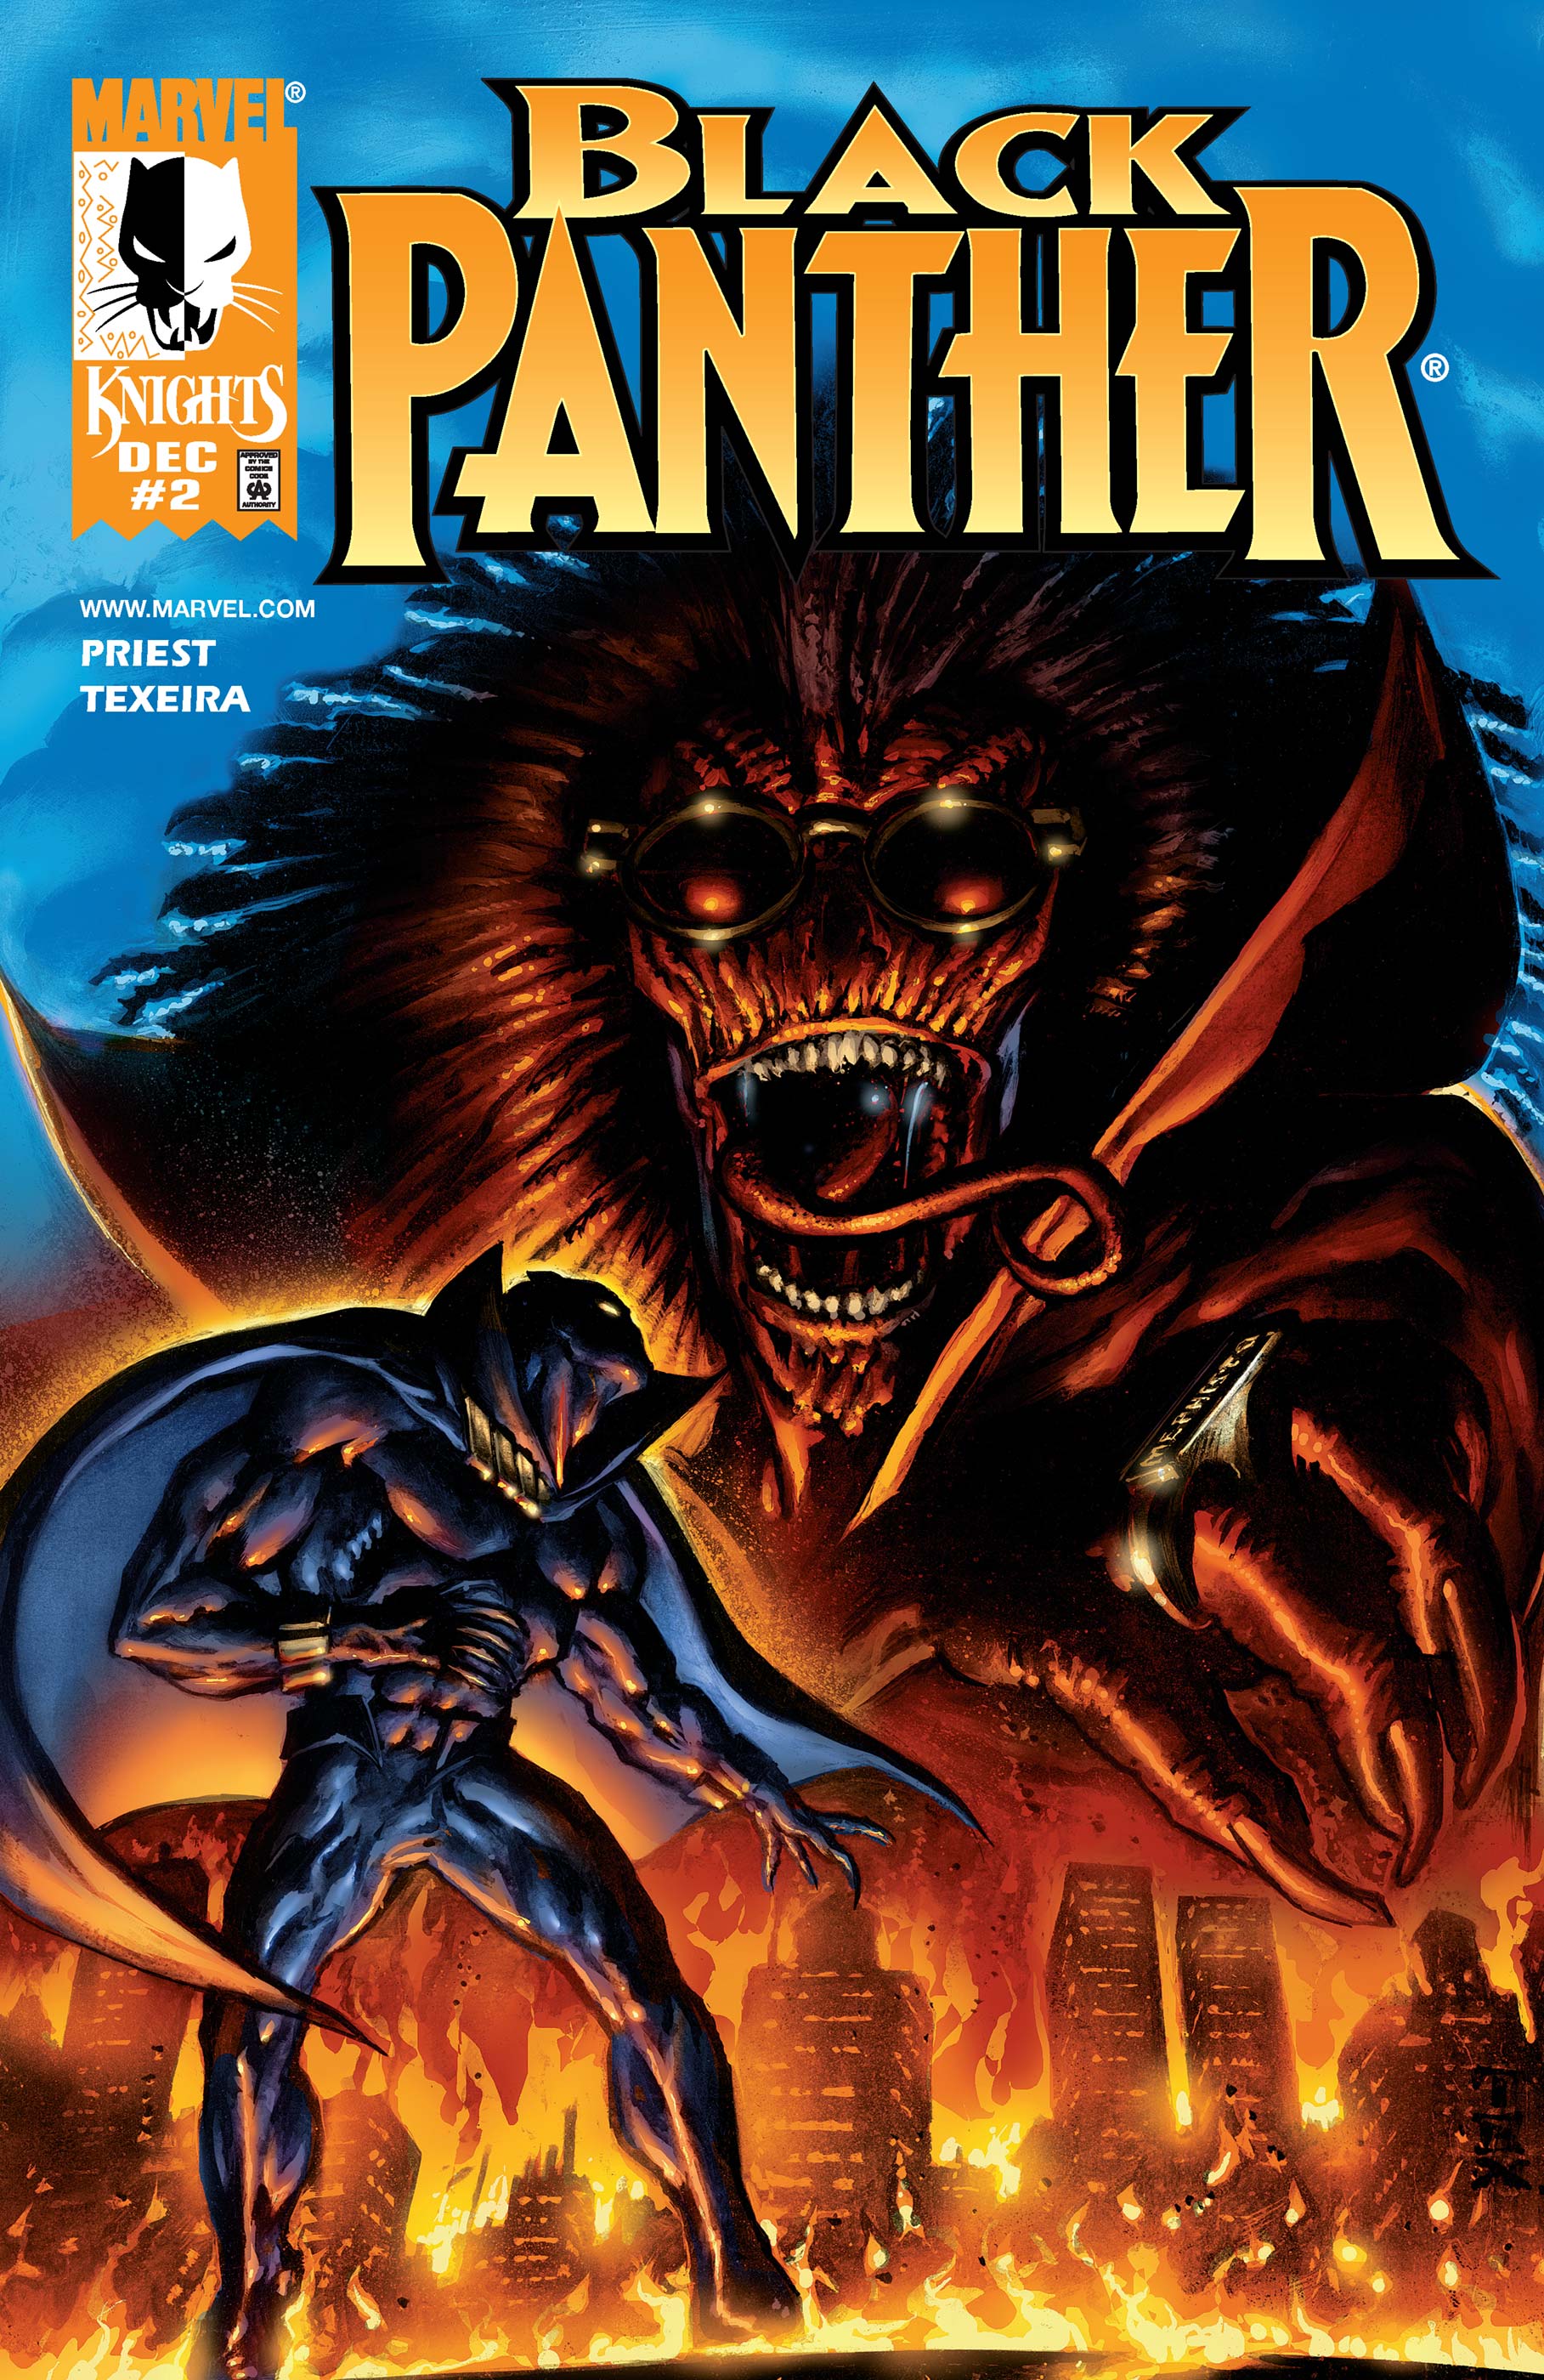 Variant 1998 Christopher Priest & Mark Texeira Black Panther No.2 Vol.2 